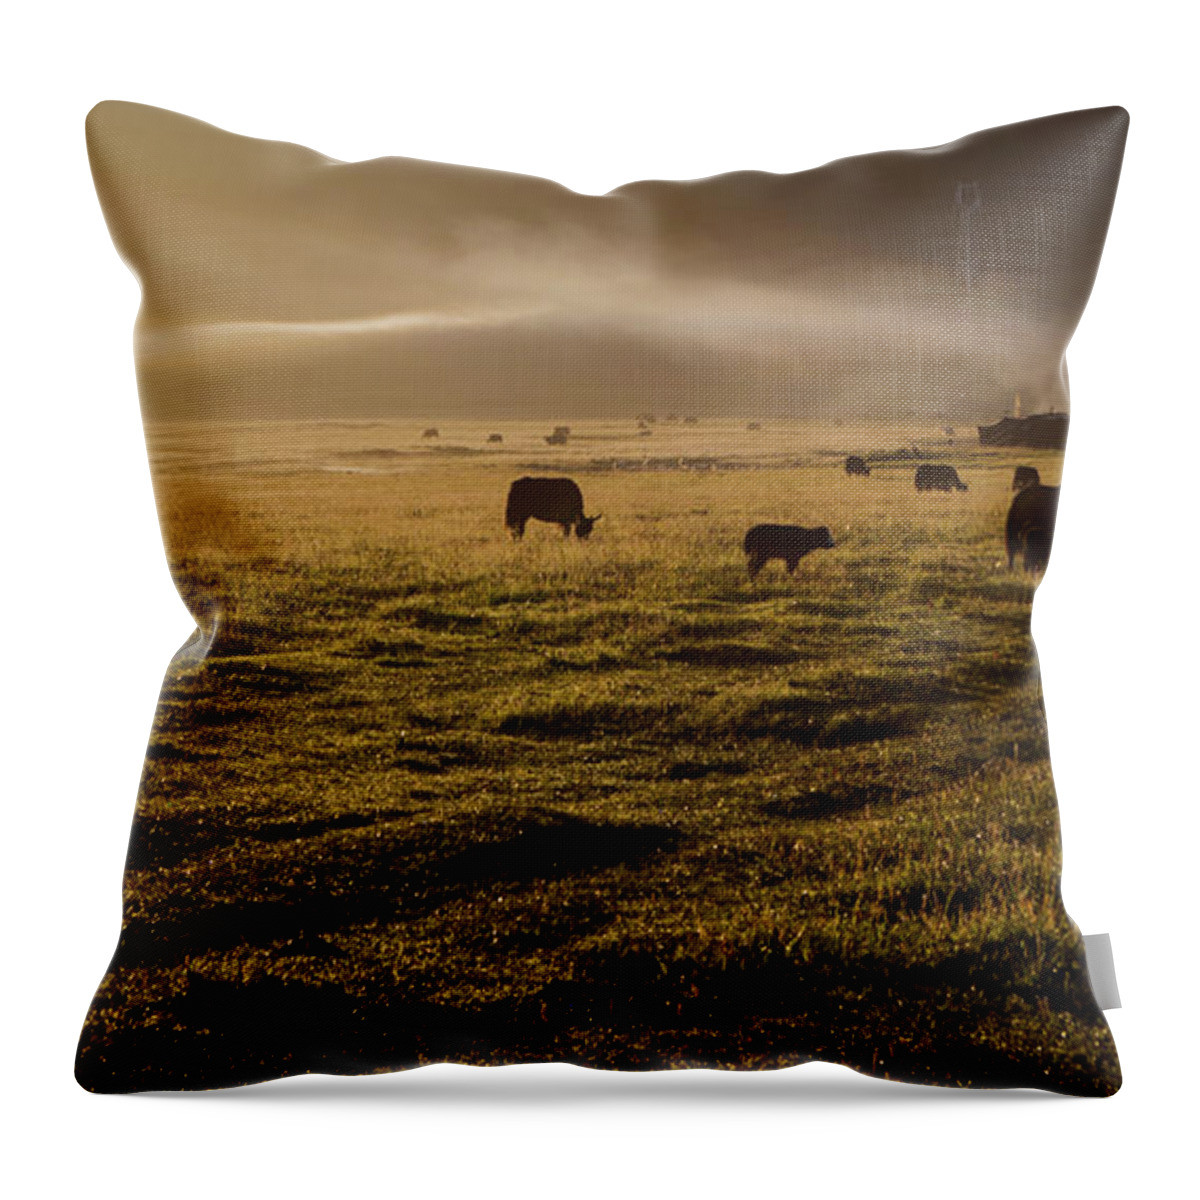 Dawn Throw Pillow featuring the photograph The Pride Of The Morning by Zhouyousifang